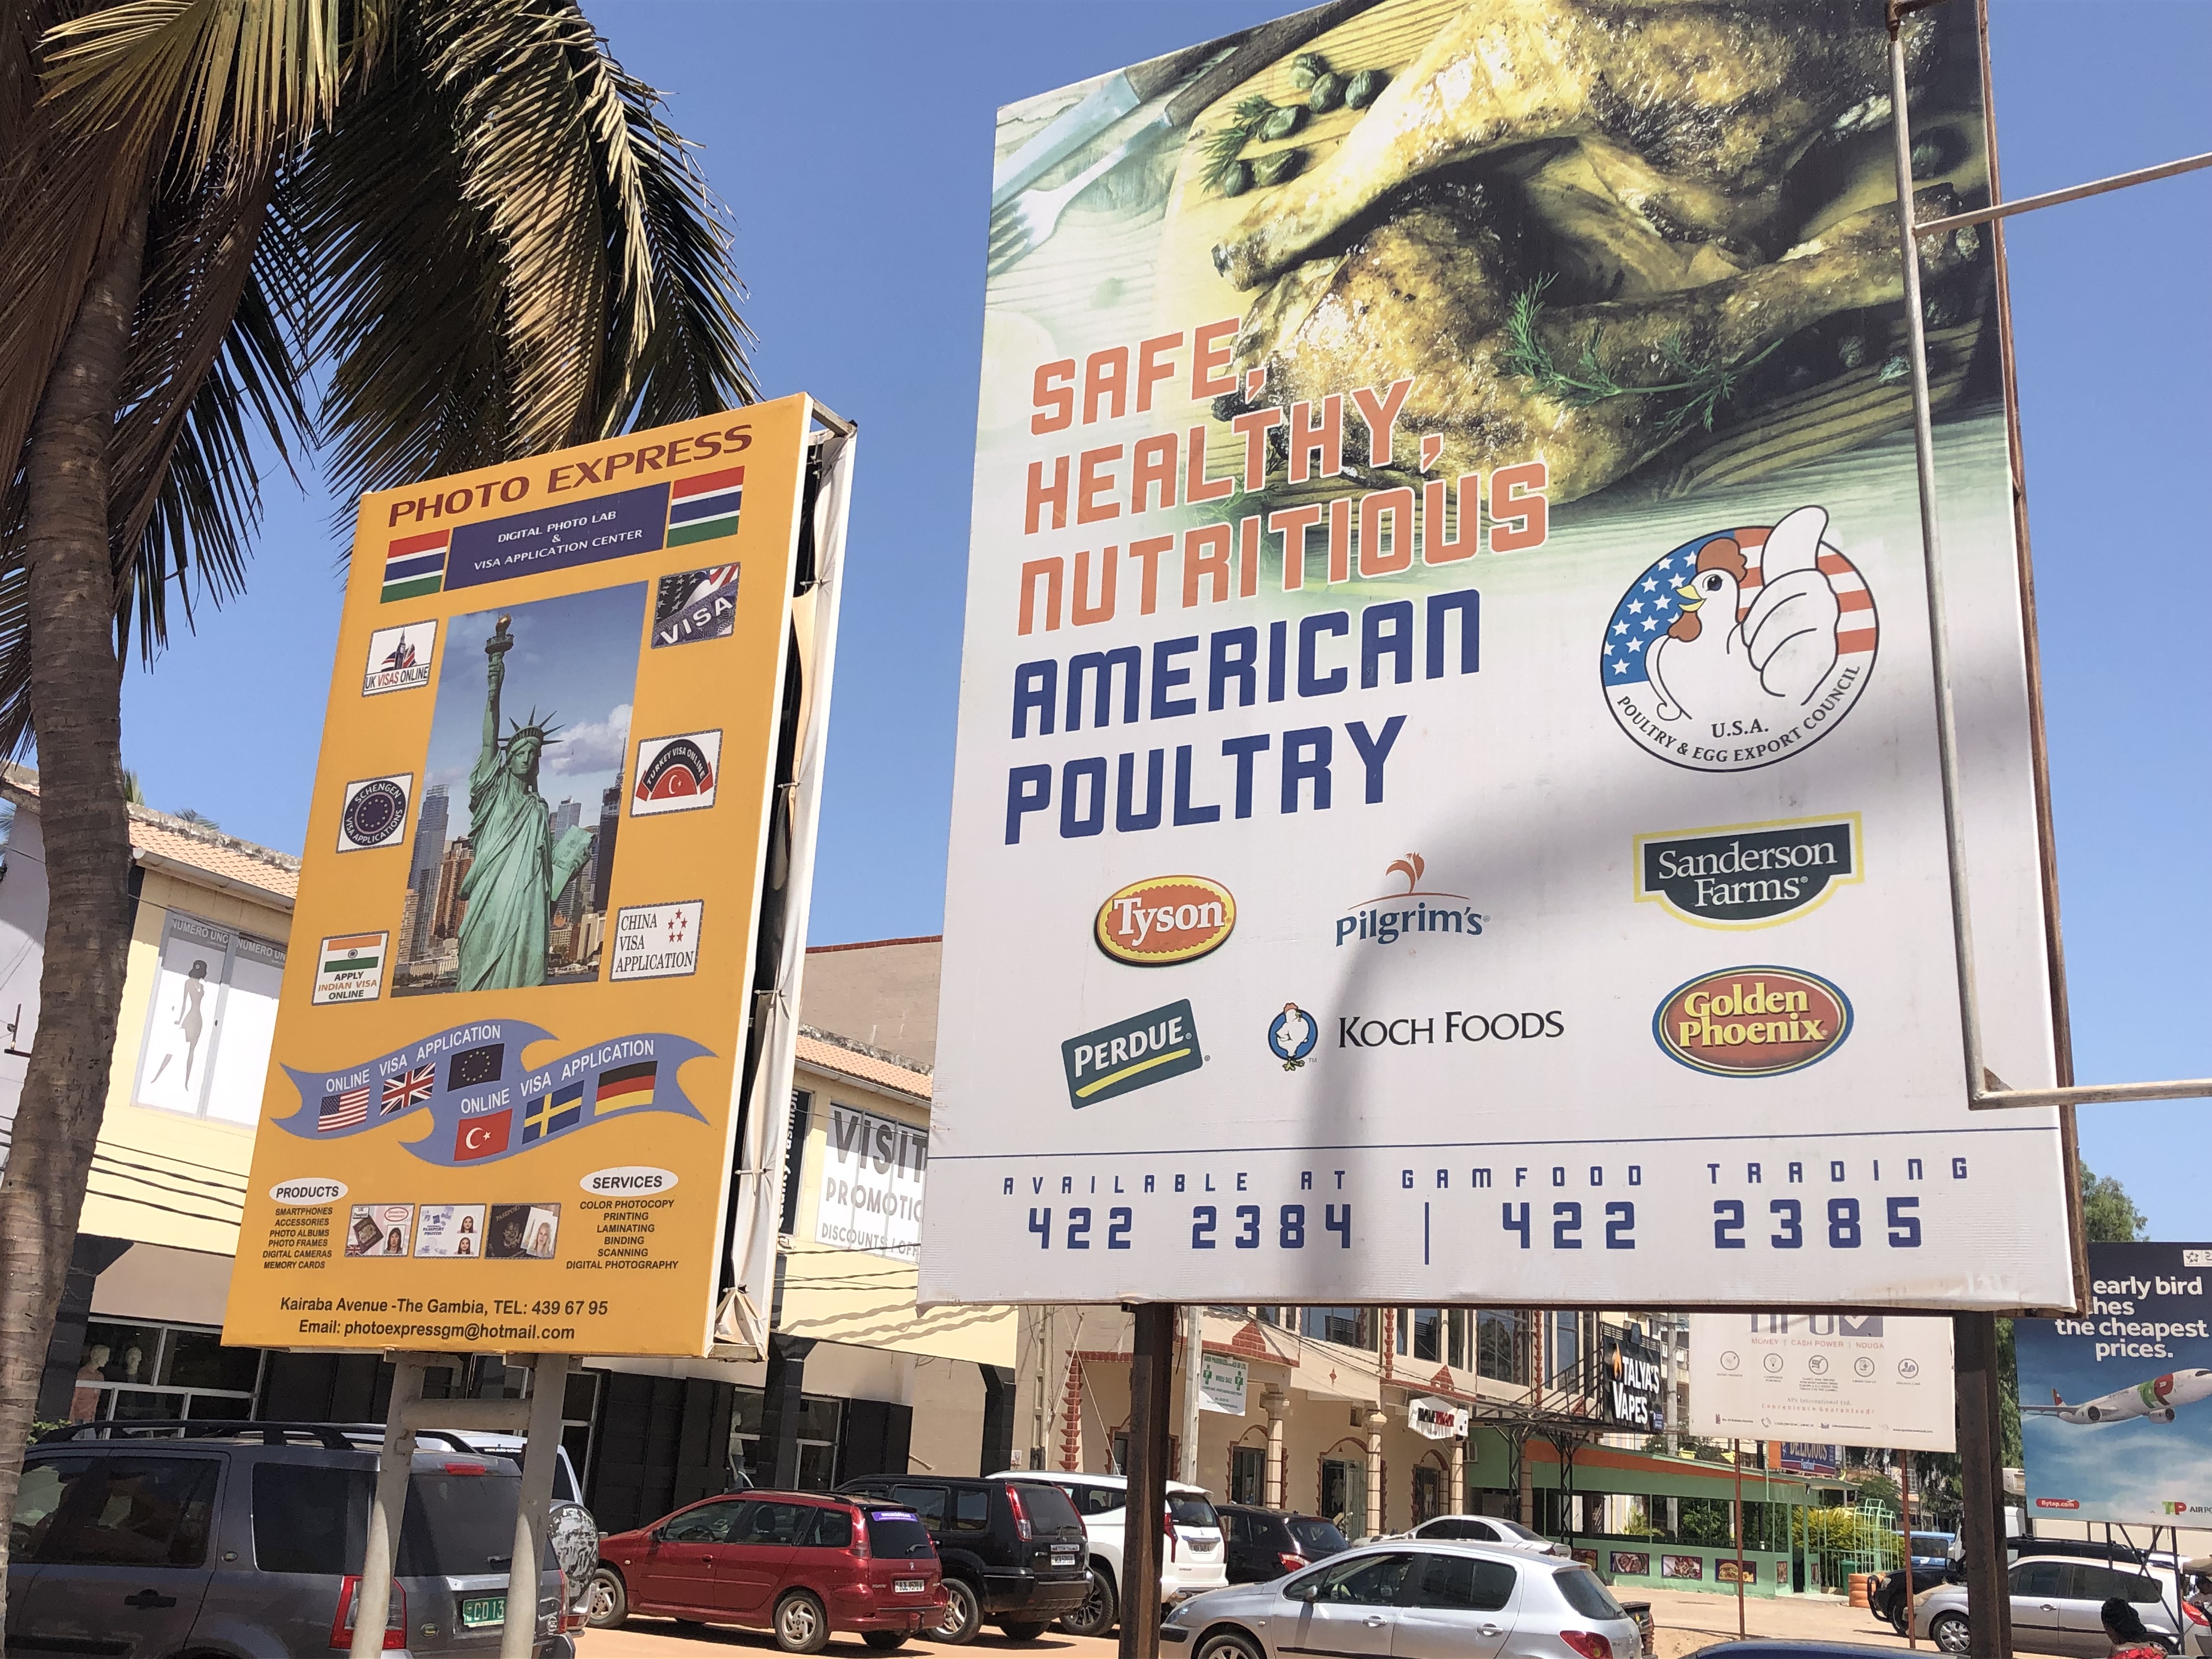 Advertisement on a billboard in The Gambia for American poultry. Photo by Martin Aucoin